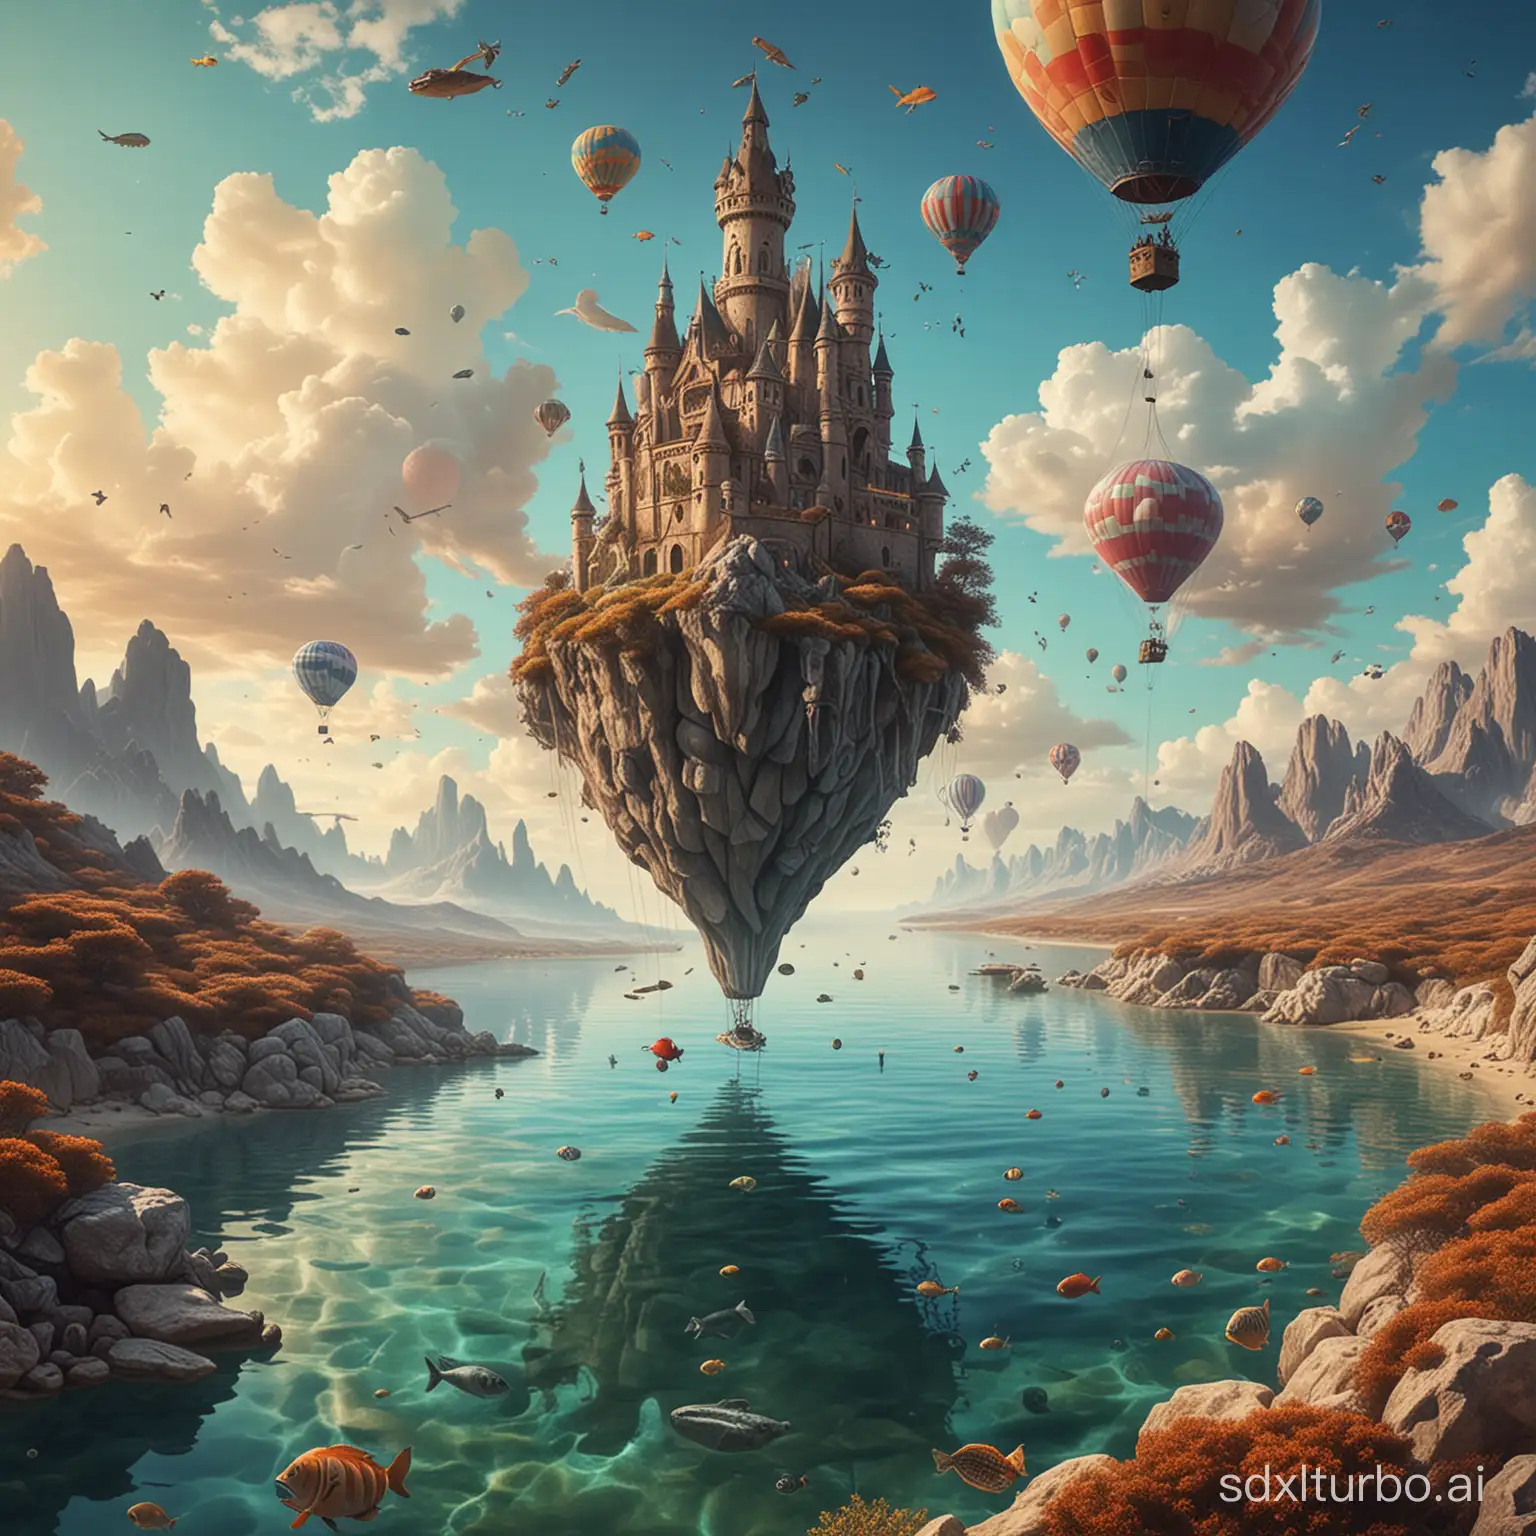 Dive into the world of SURREALISM ART